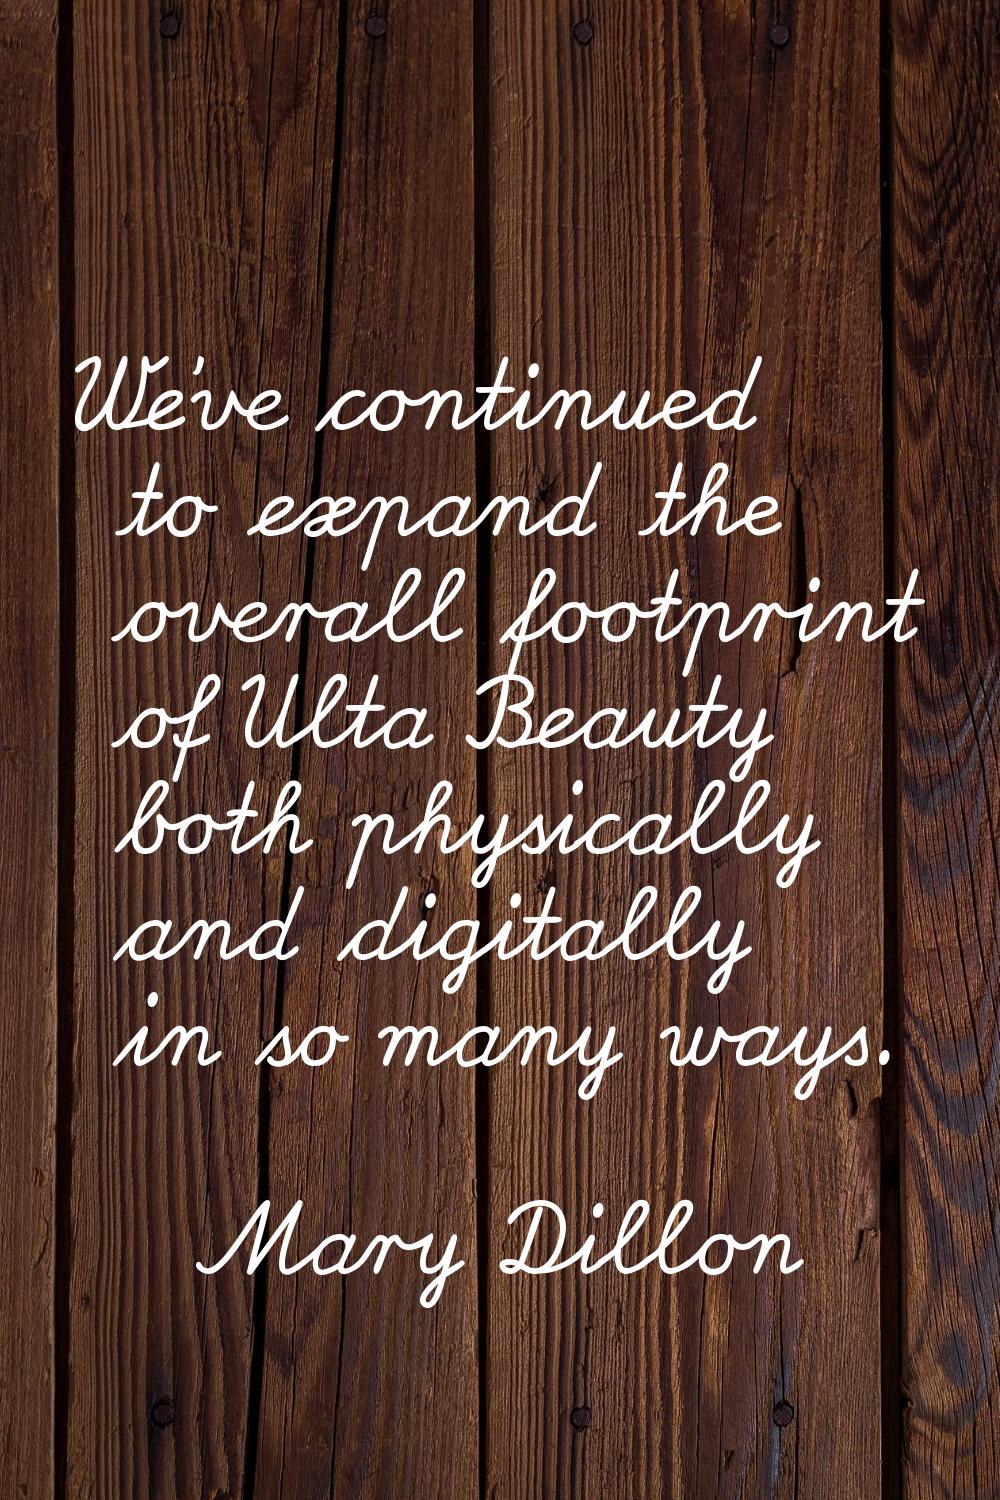 We've continued to expand the overall footprint of Ulta Beauty both physically and digitally in so 